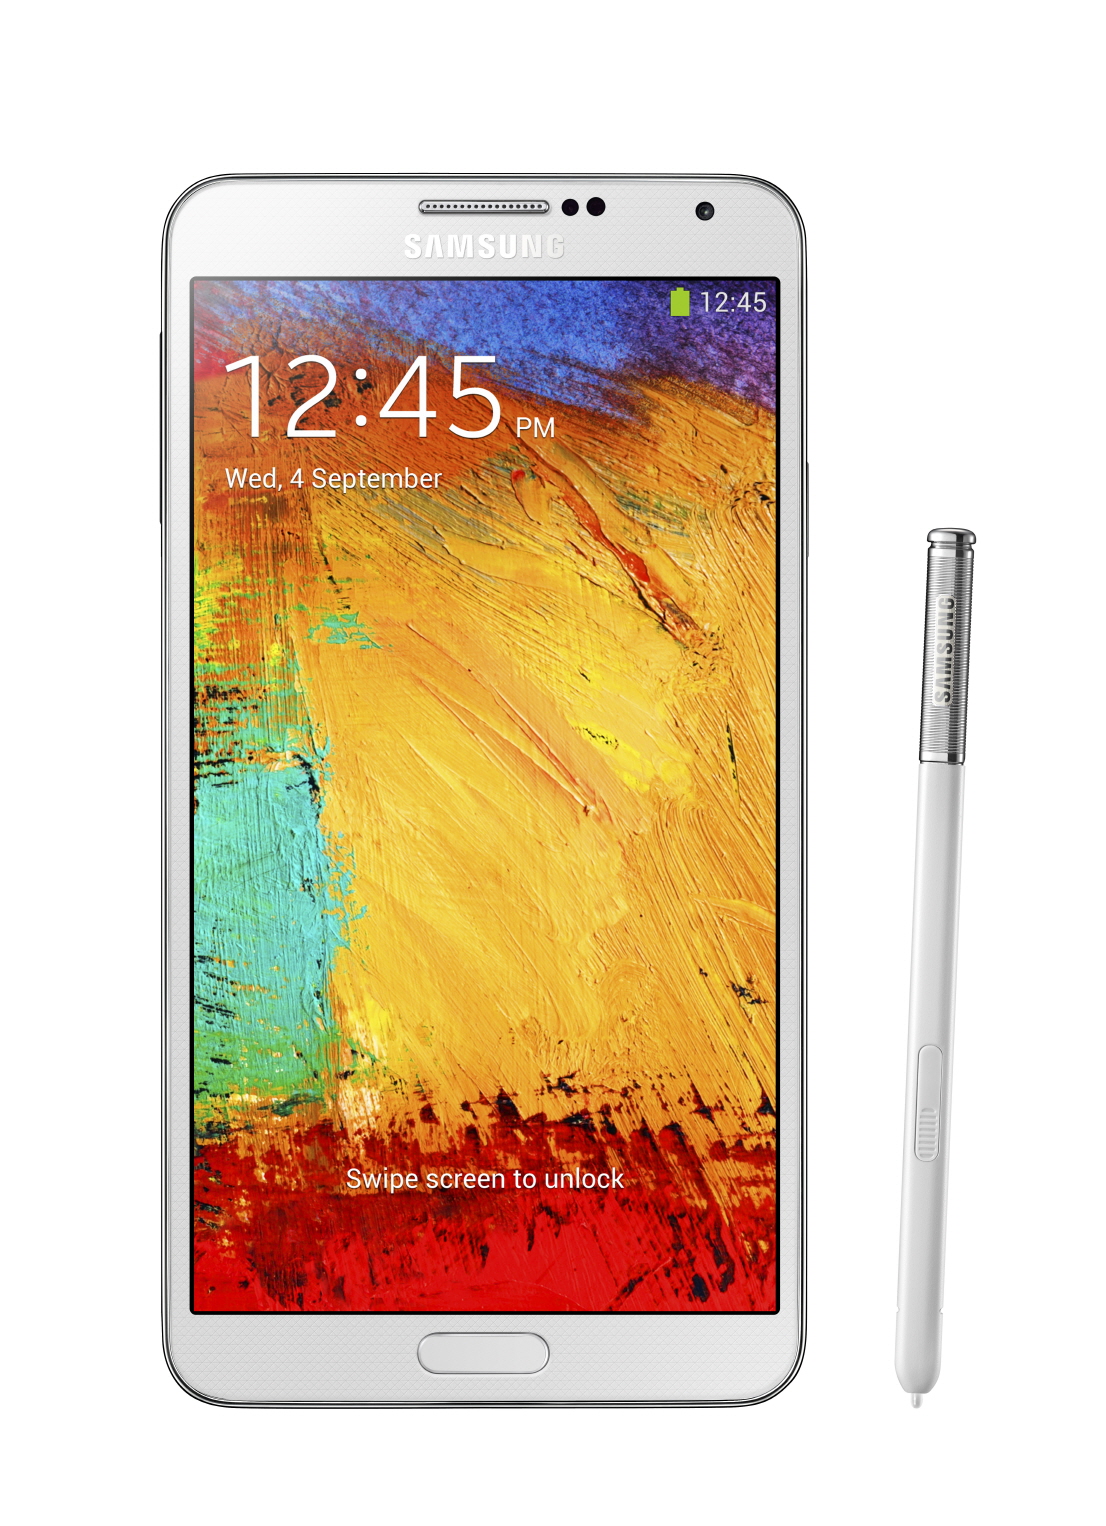 Samsung Galaxy Note 3 launched in India for Rs. 49,900, will be